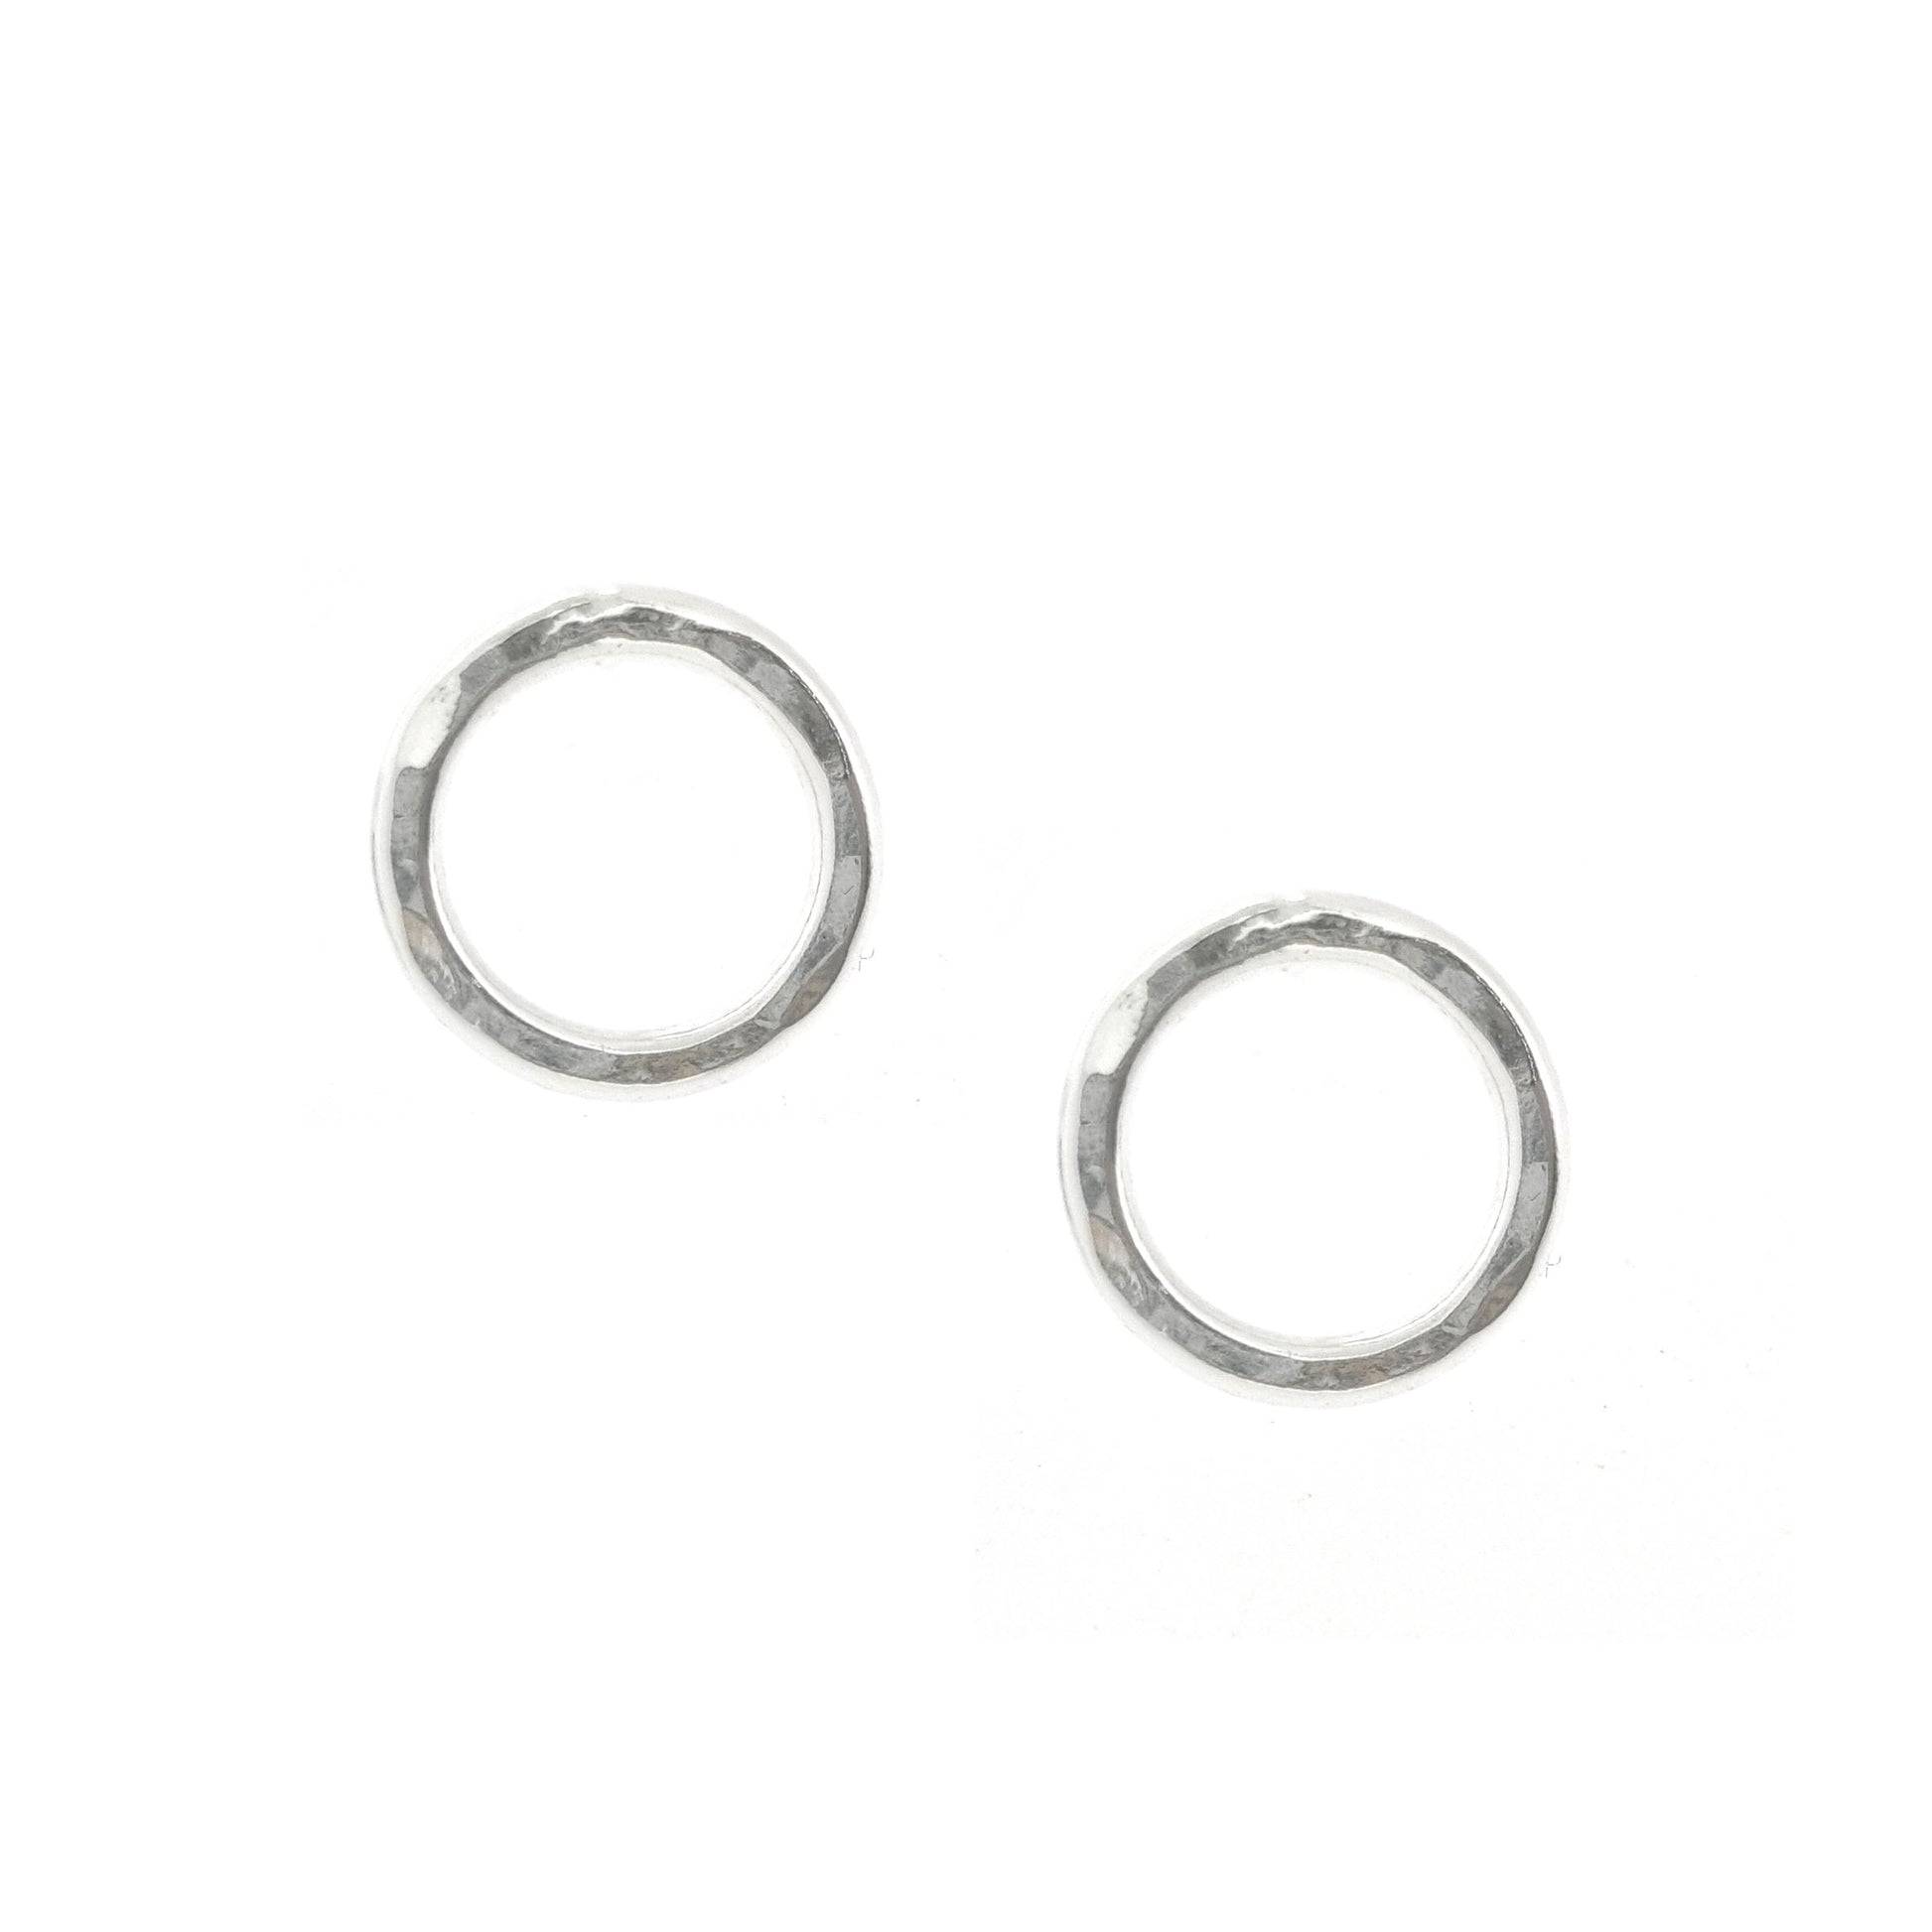 Silver open circle stud earrings with hammered texture.